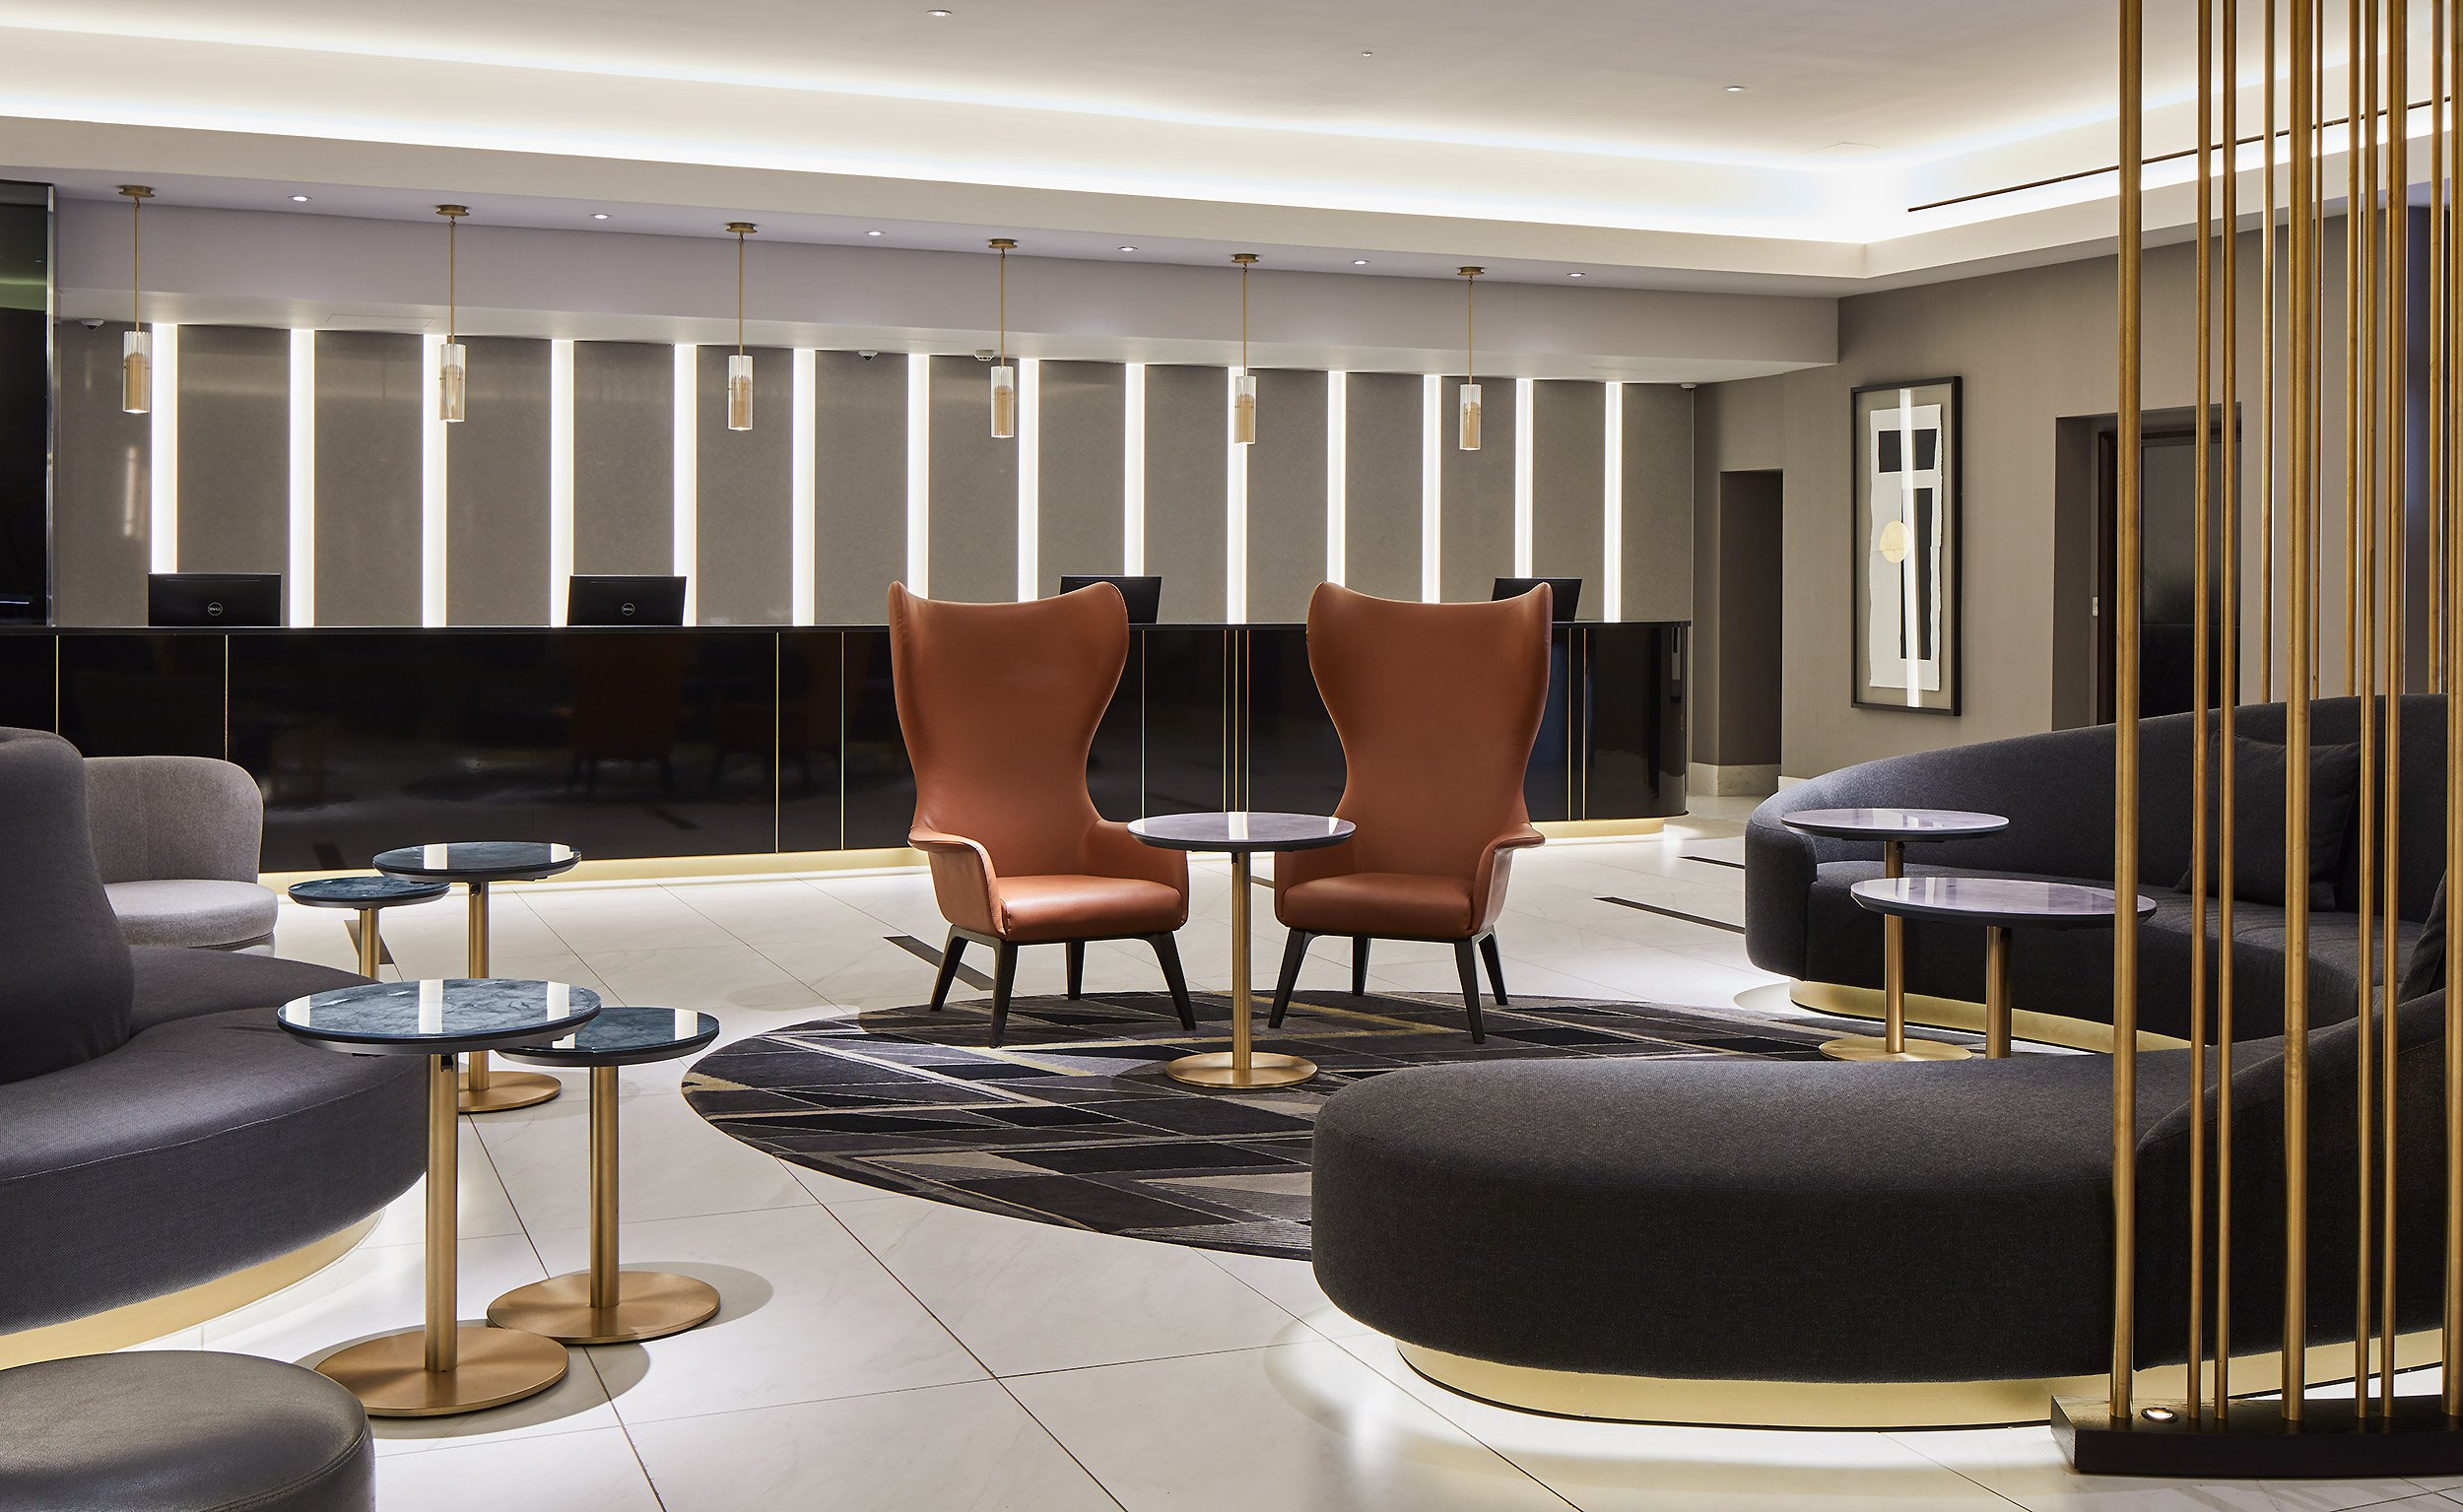 Lobby at the Strand Palace hotel, London.  Interior design photography by Mike Caldwell 